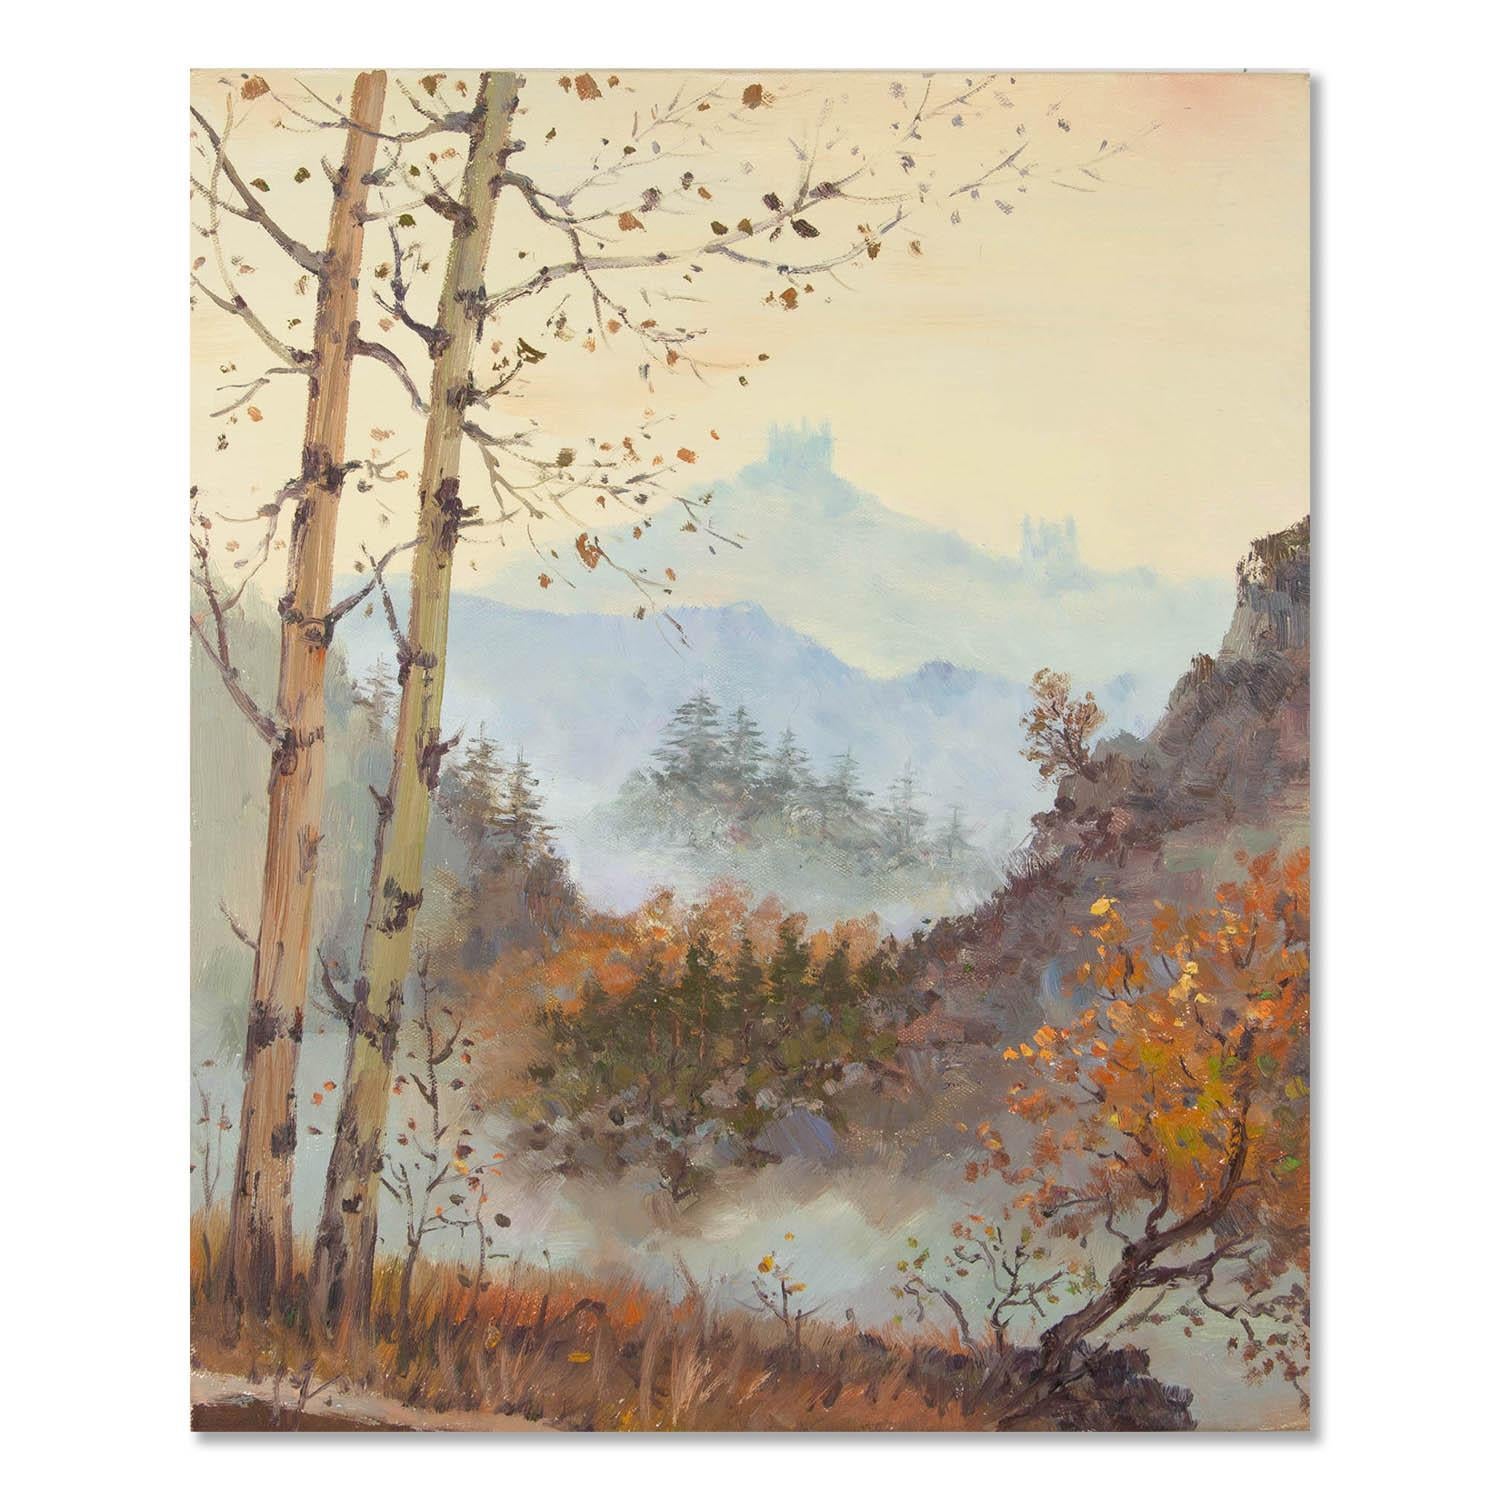  Title: Morning In The Mountains
 Medium: Oil on canvas
 Size: 23 x 19 inches
 Frame: Framing options available!
 Condition: The painting appears to be in excellent condition.
 
 Year: 2015
 Artist: Shanwen Mou
 Signature: Signed
 Signature